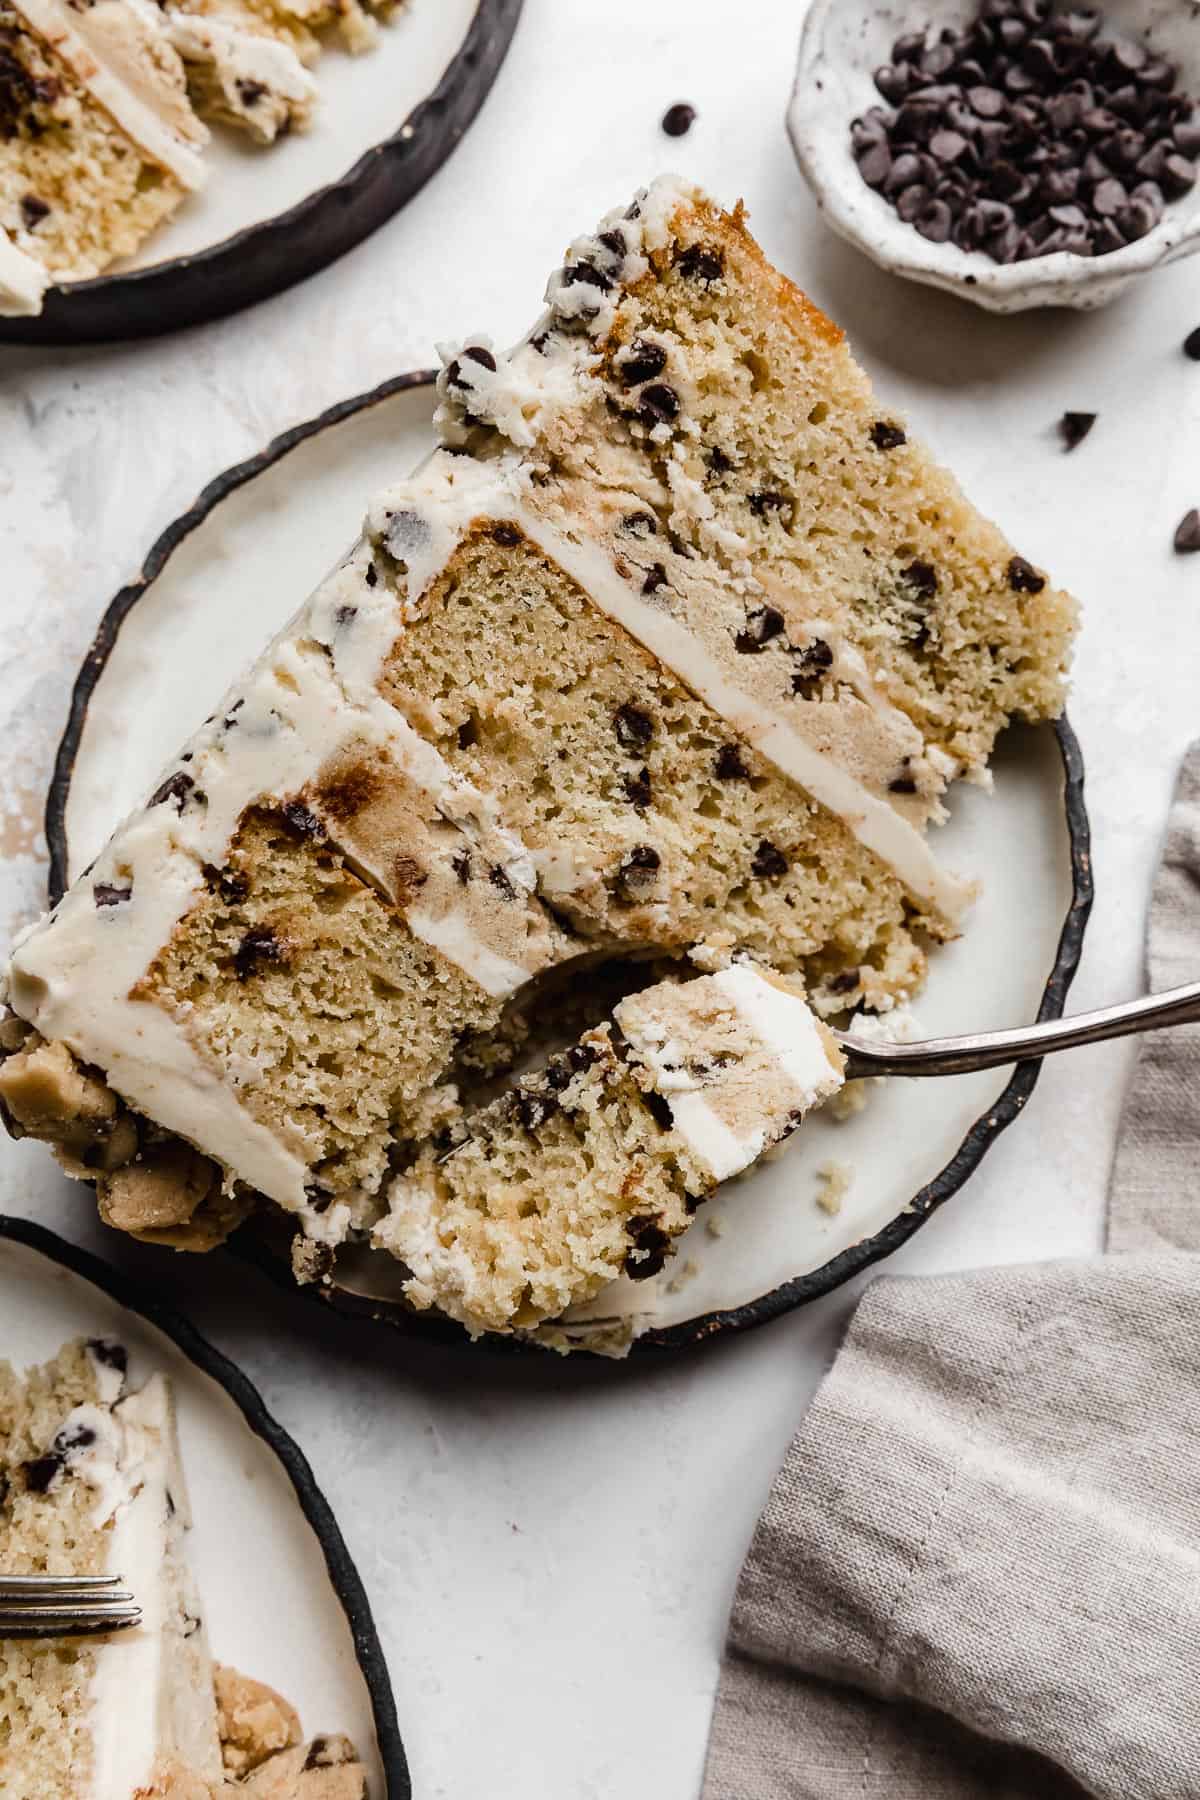 A Cookie Dough Cake slice on a black rimmed white plate with a fork cutting into the top portion of the cake.